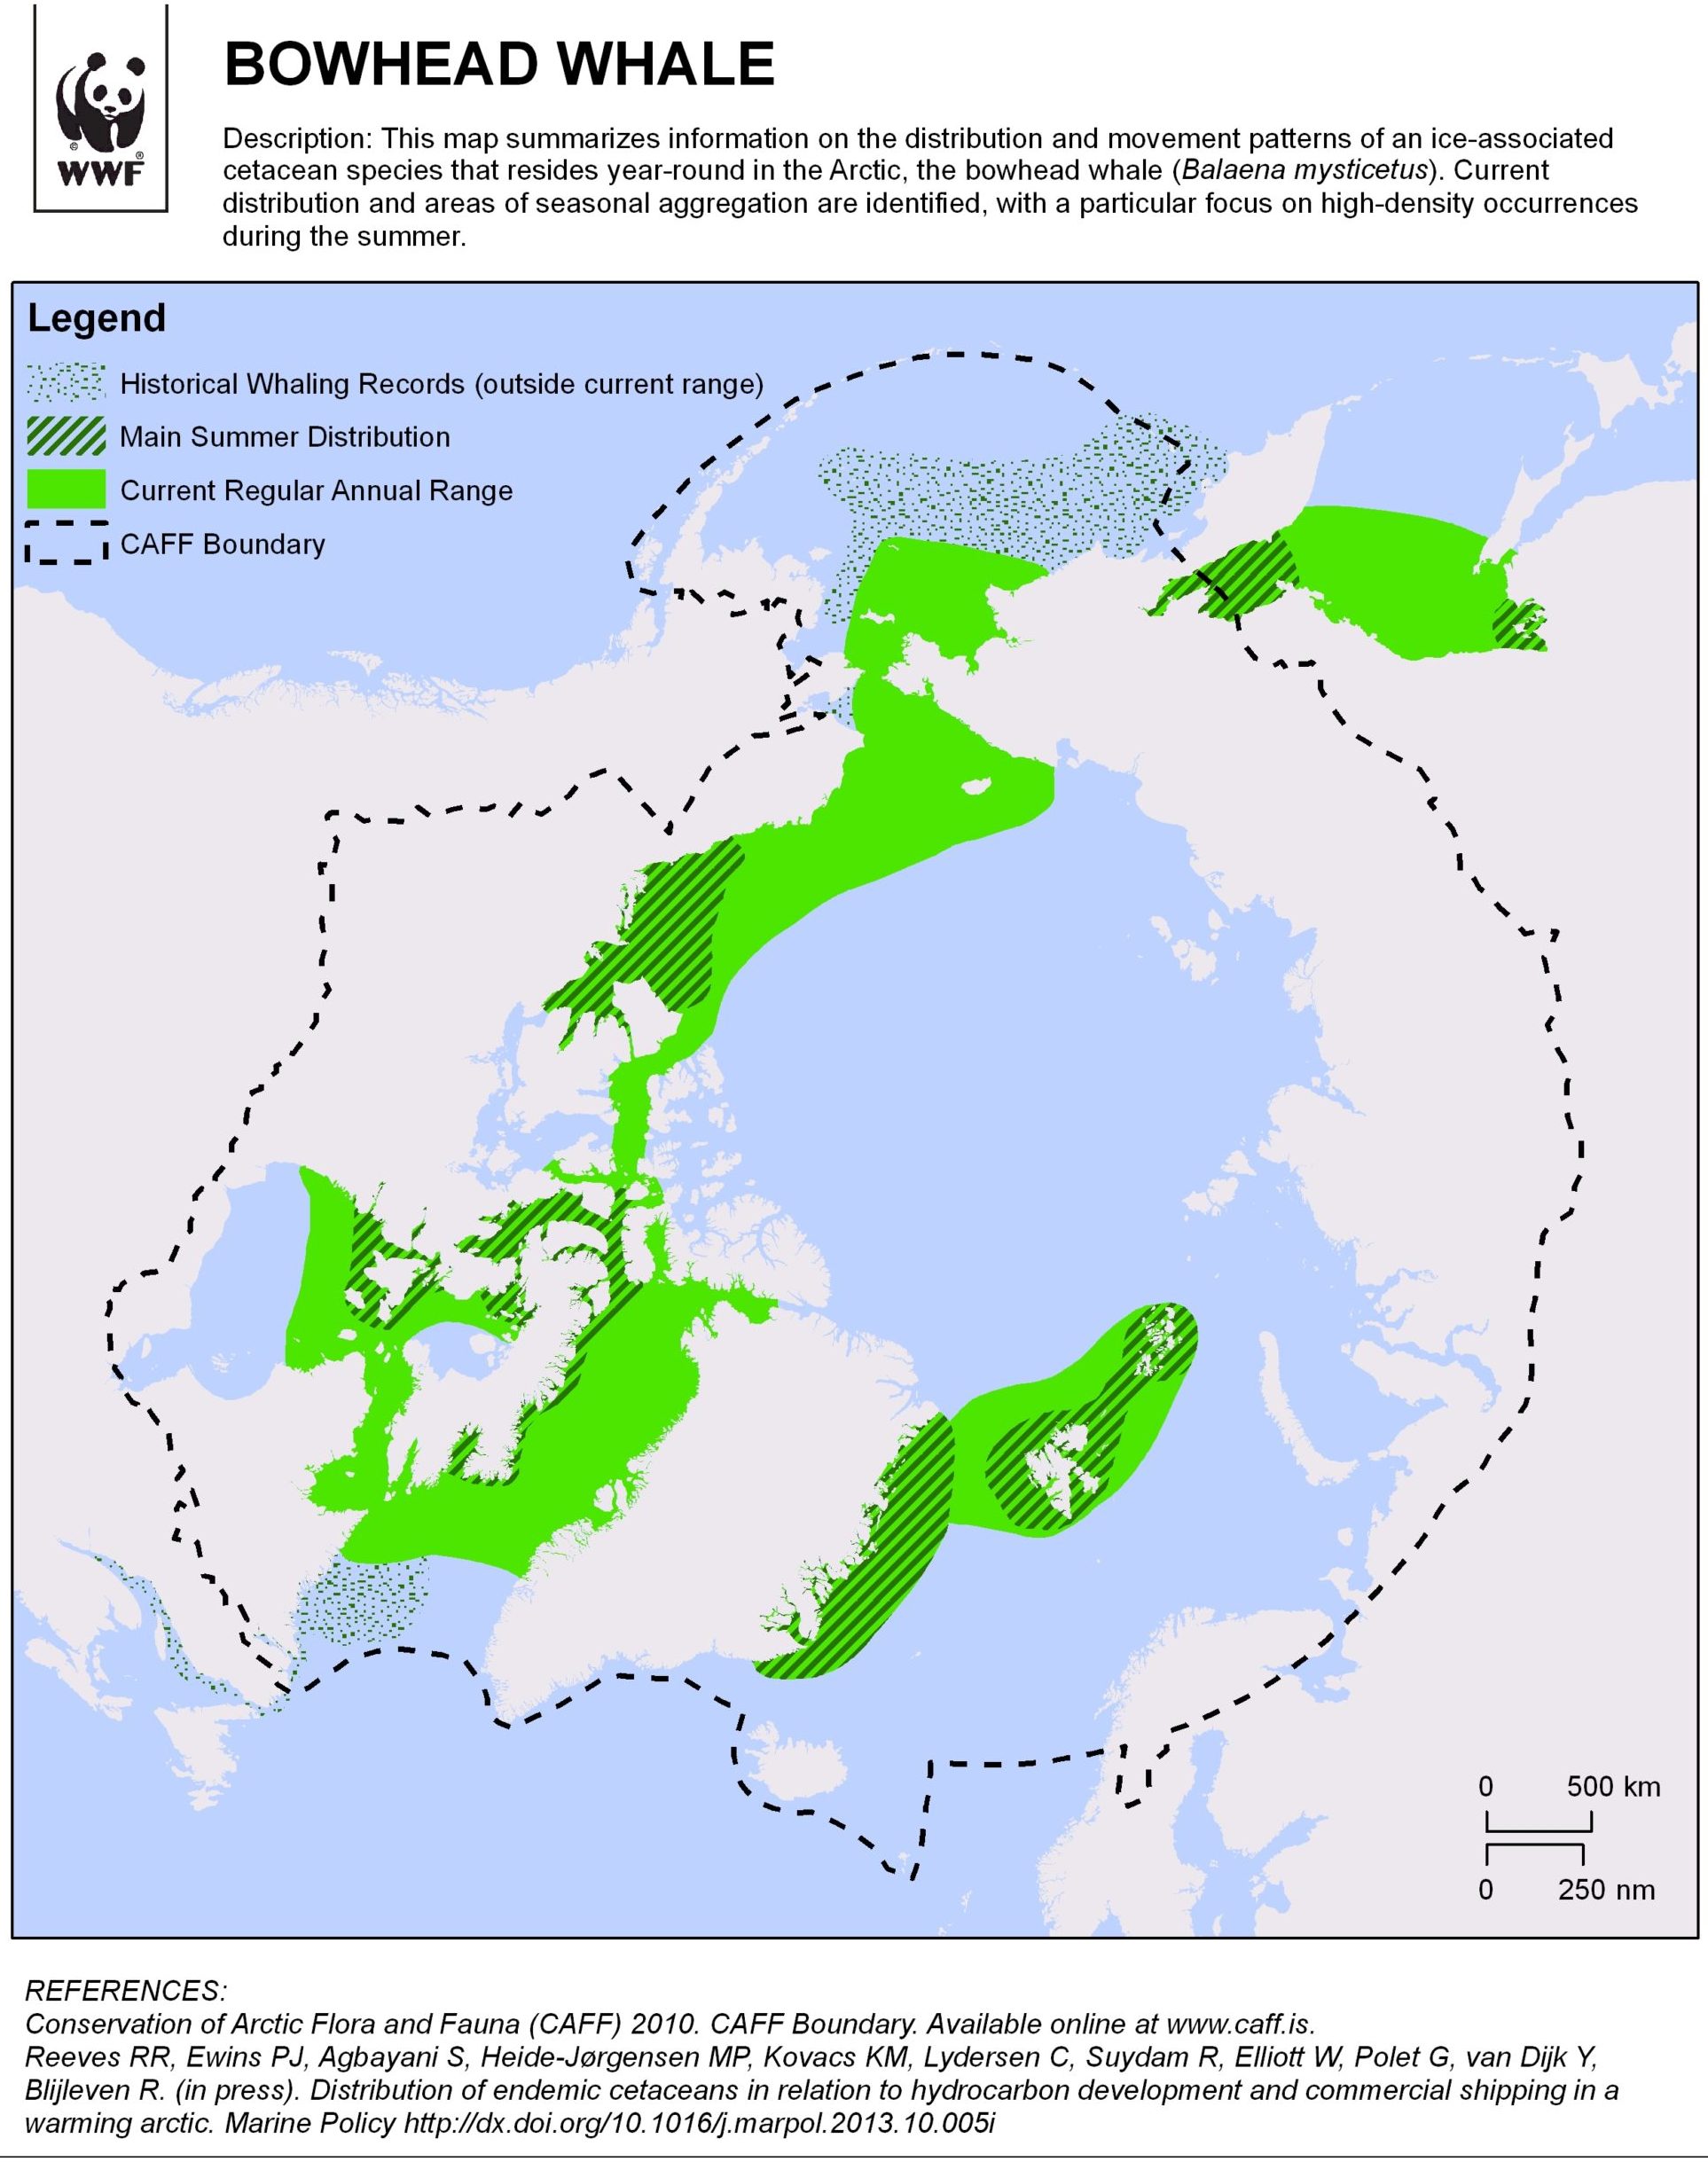 Distribution and movement patterns of bowhead whales in the Arctic